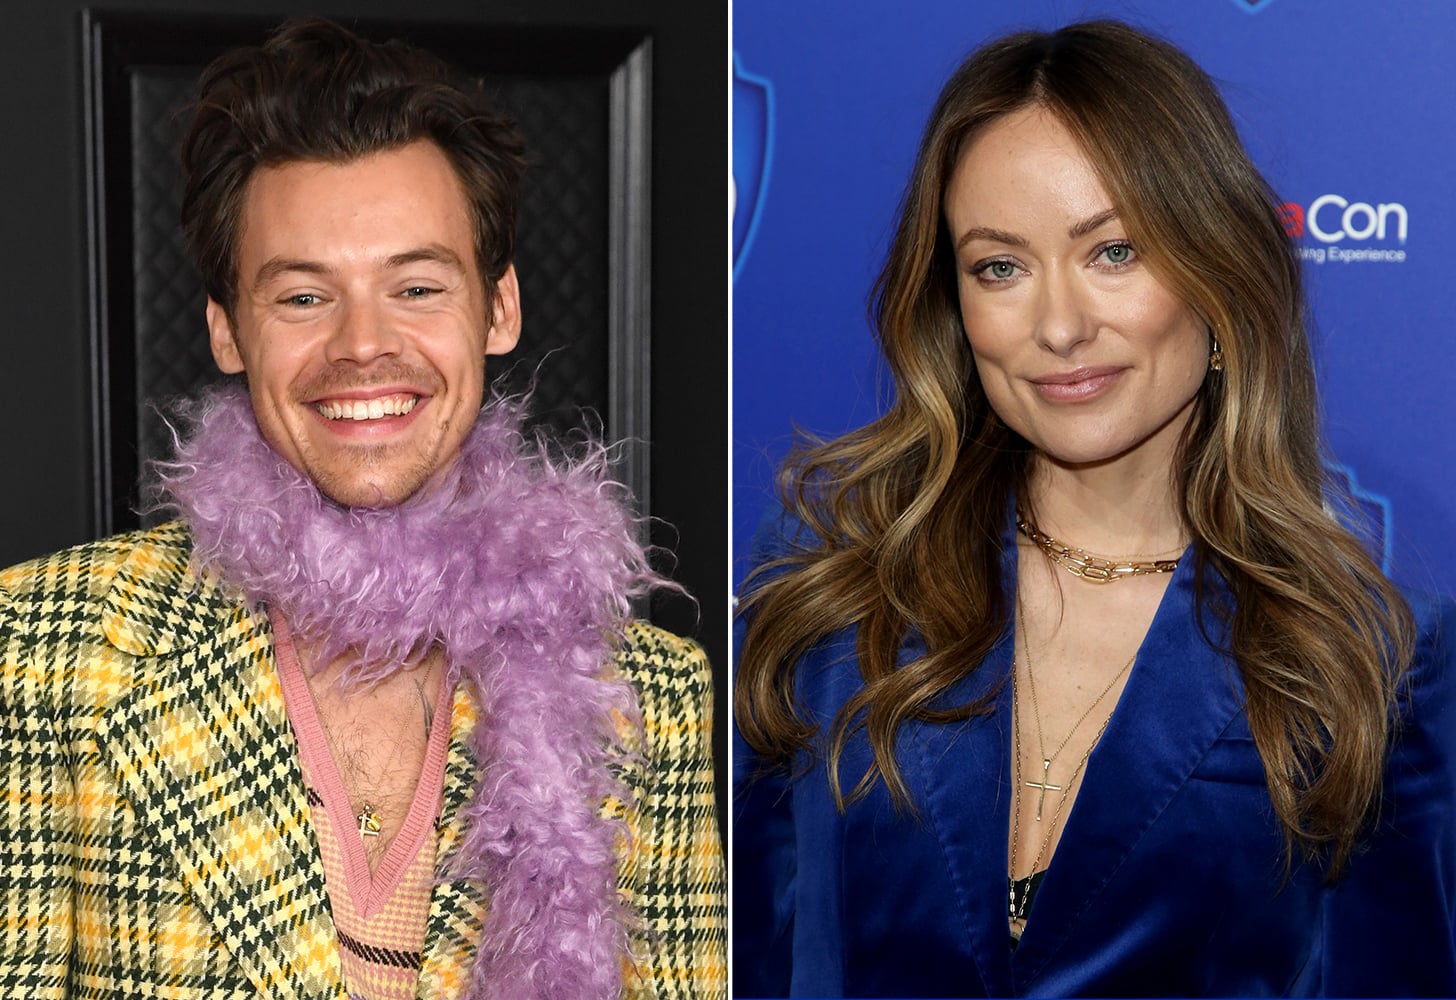 harry styles and olivia wilde